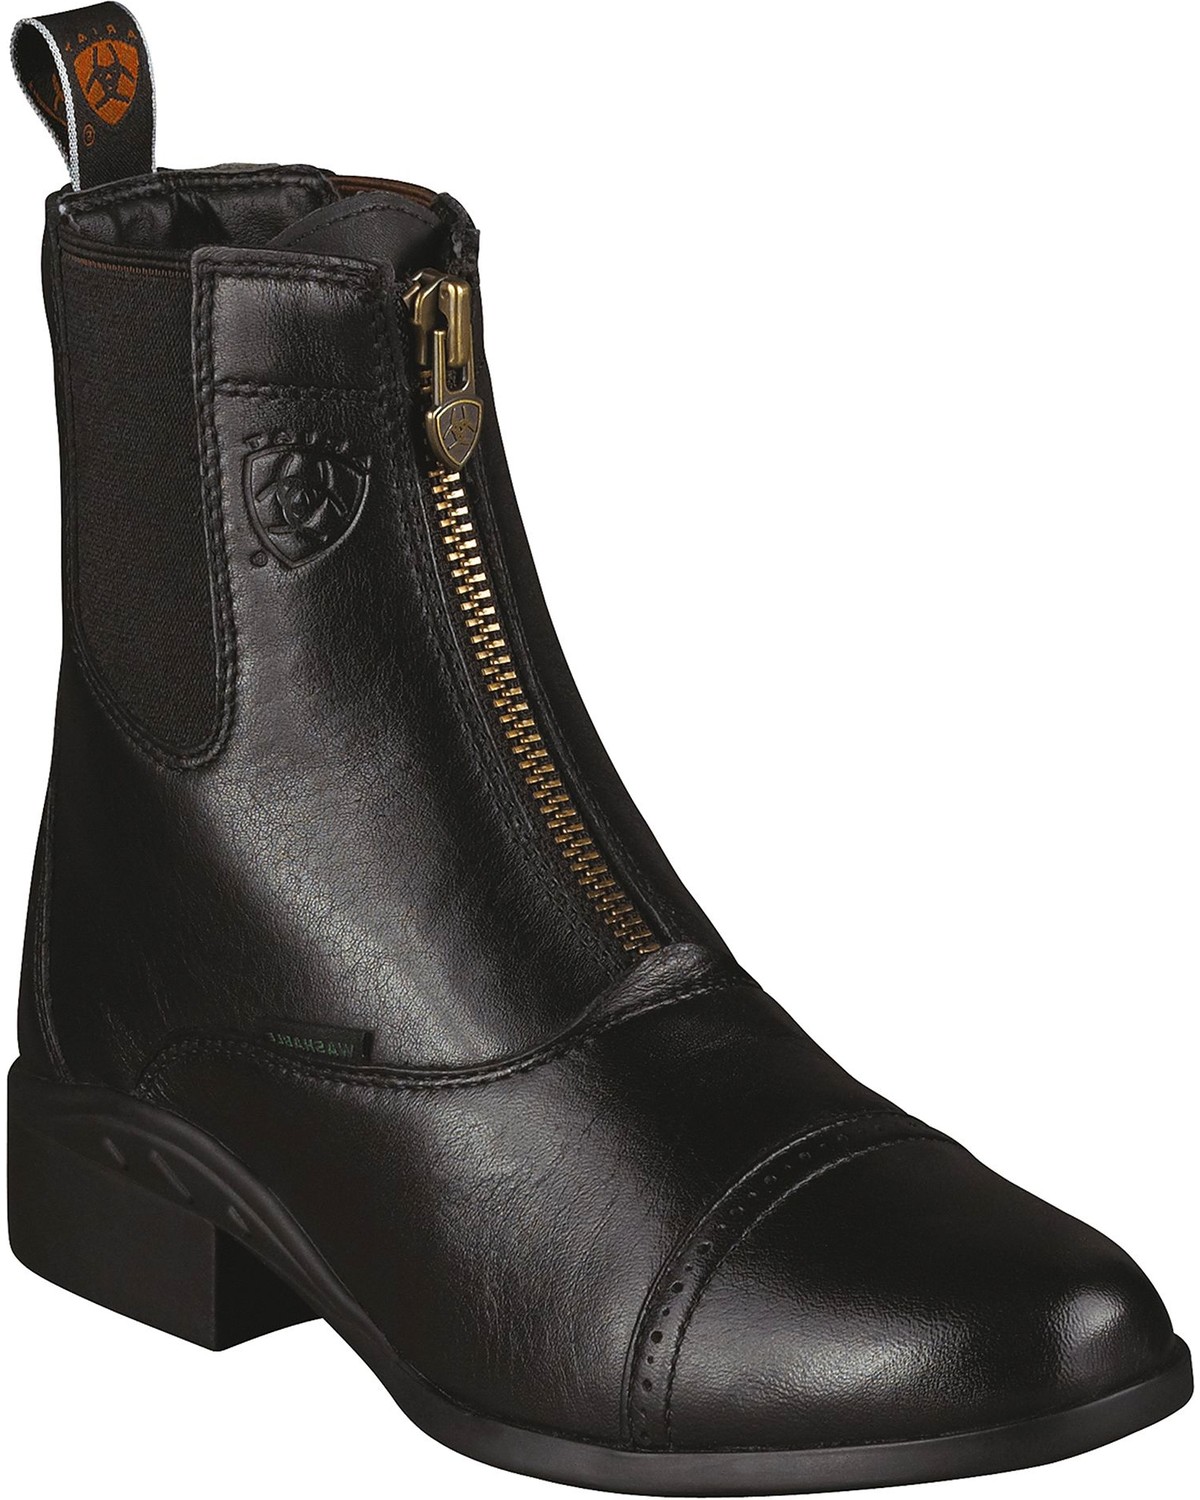 Ariat Heritage Breeze Paddock Riding Boots - Round Toe | Sheplers